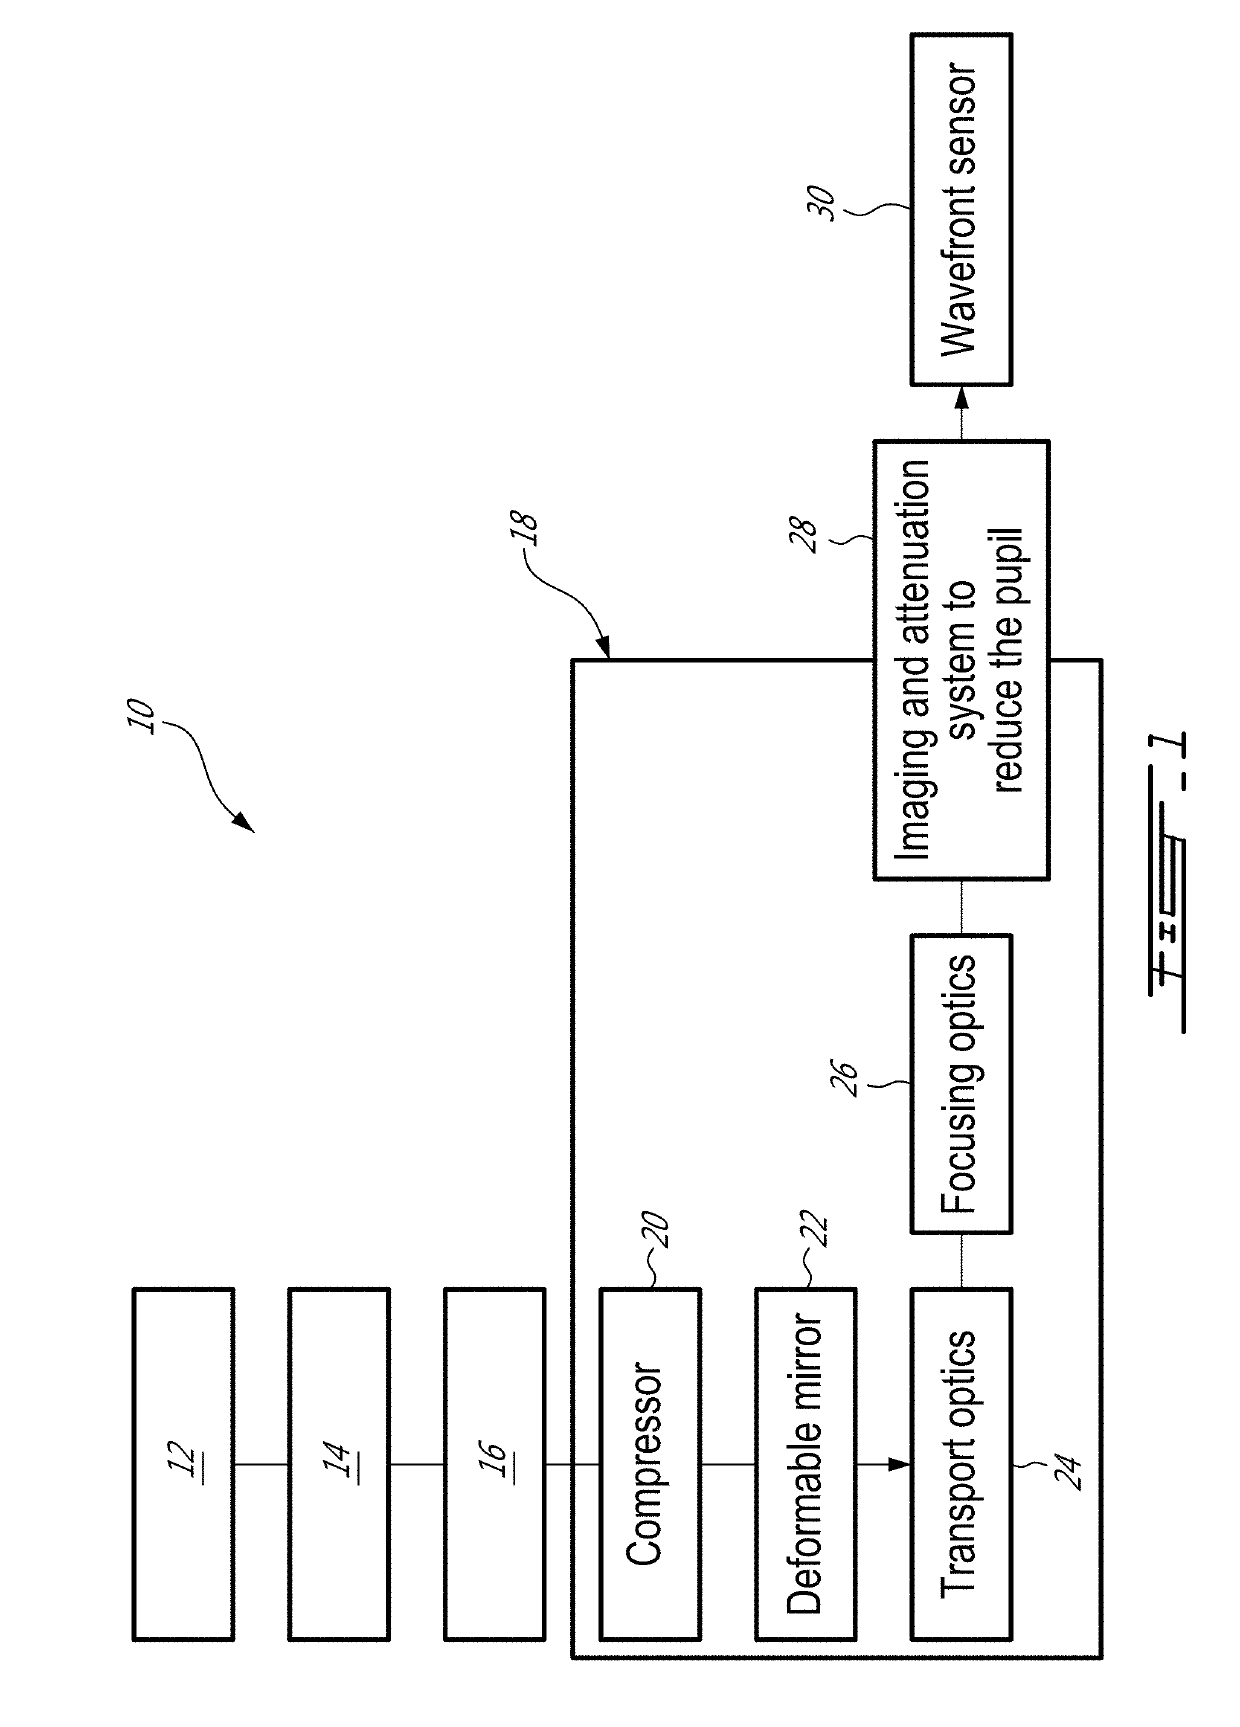 System and method for correcting laser beam wavefront of high power laser systems